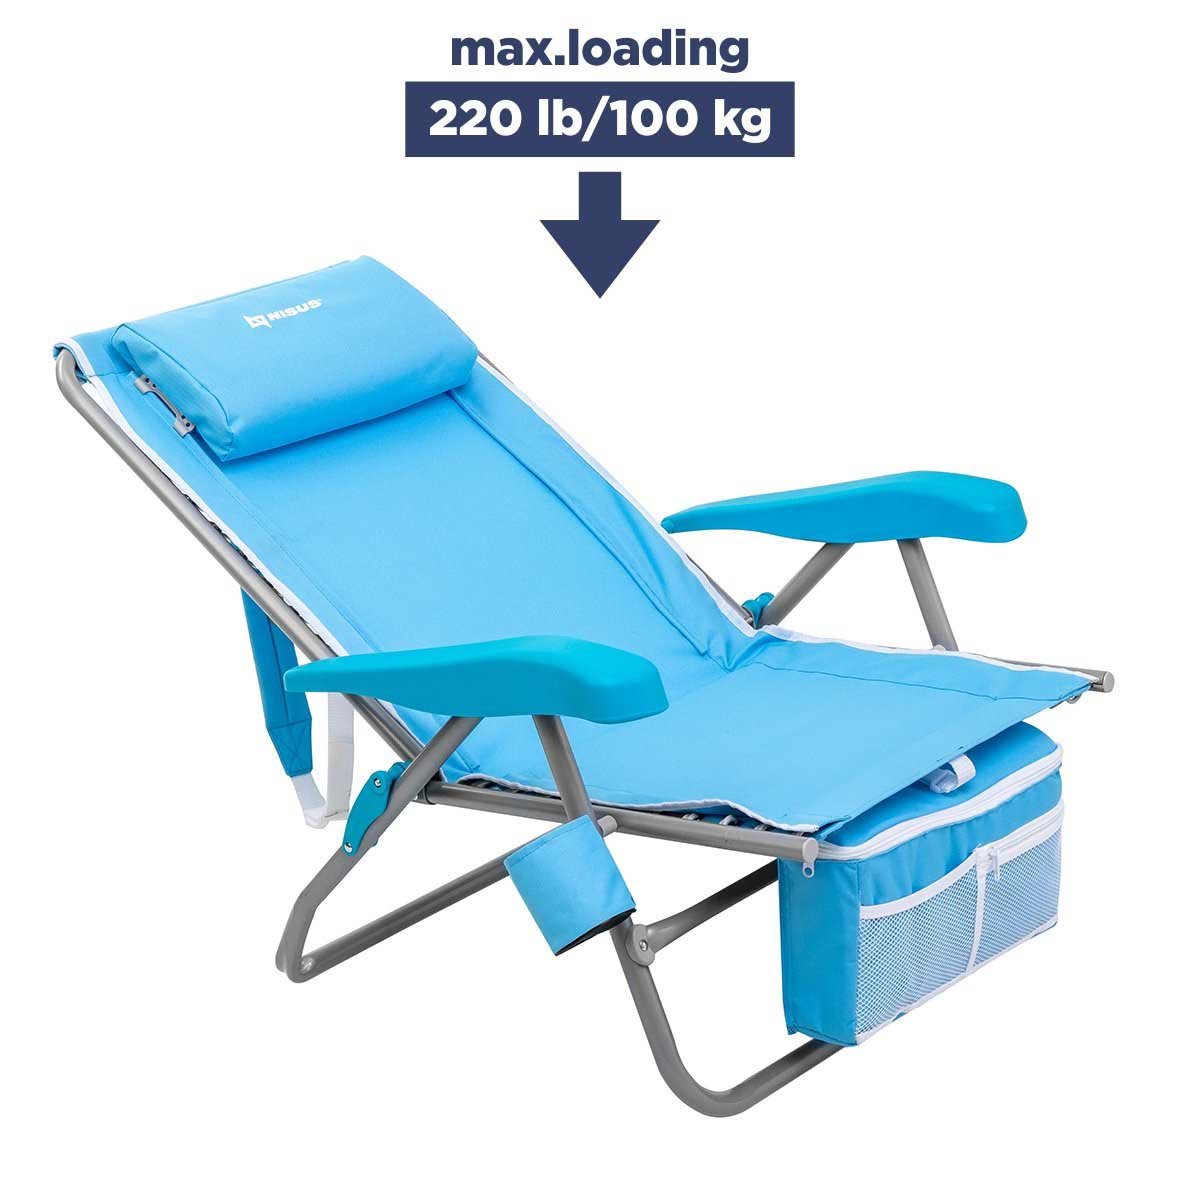 Premium Backpack Beach Chair with Cooler Bag and Headrest, Blue carries up to 220 lbs